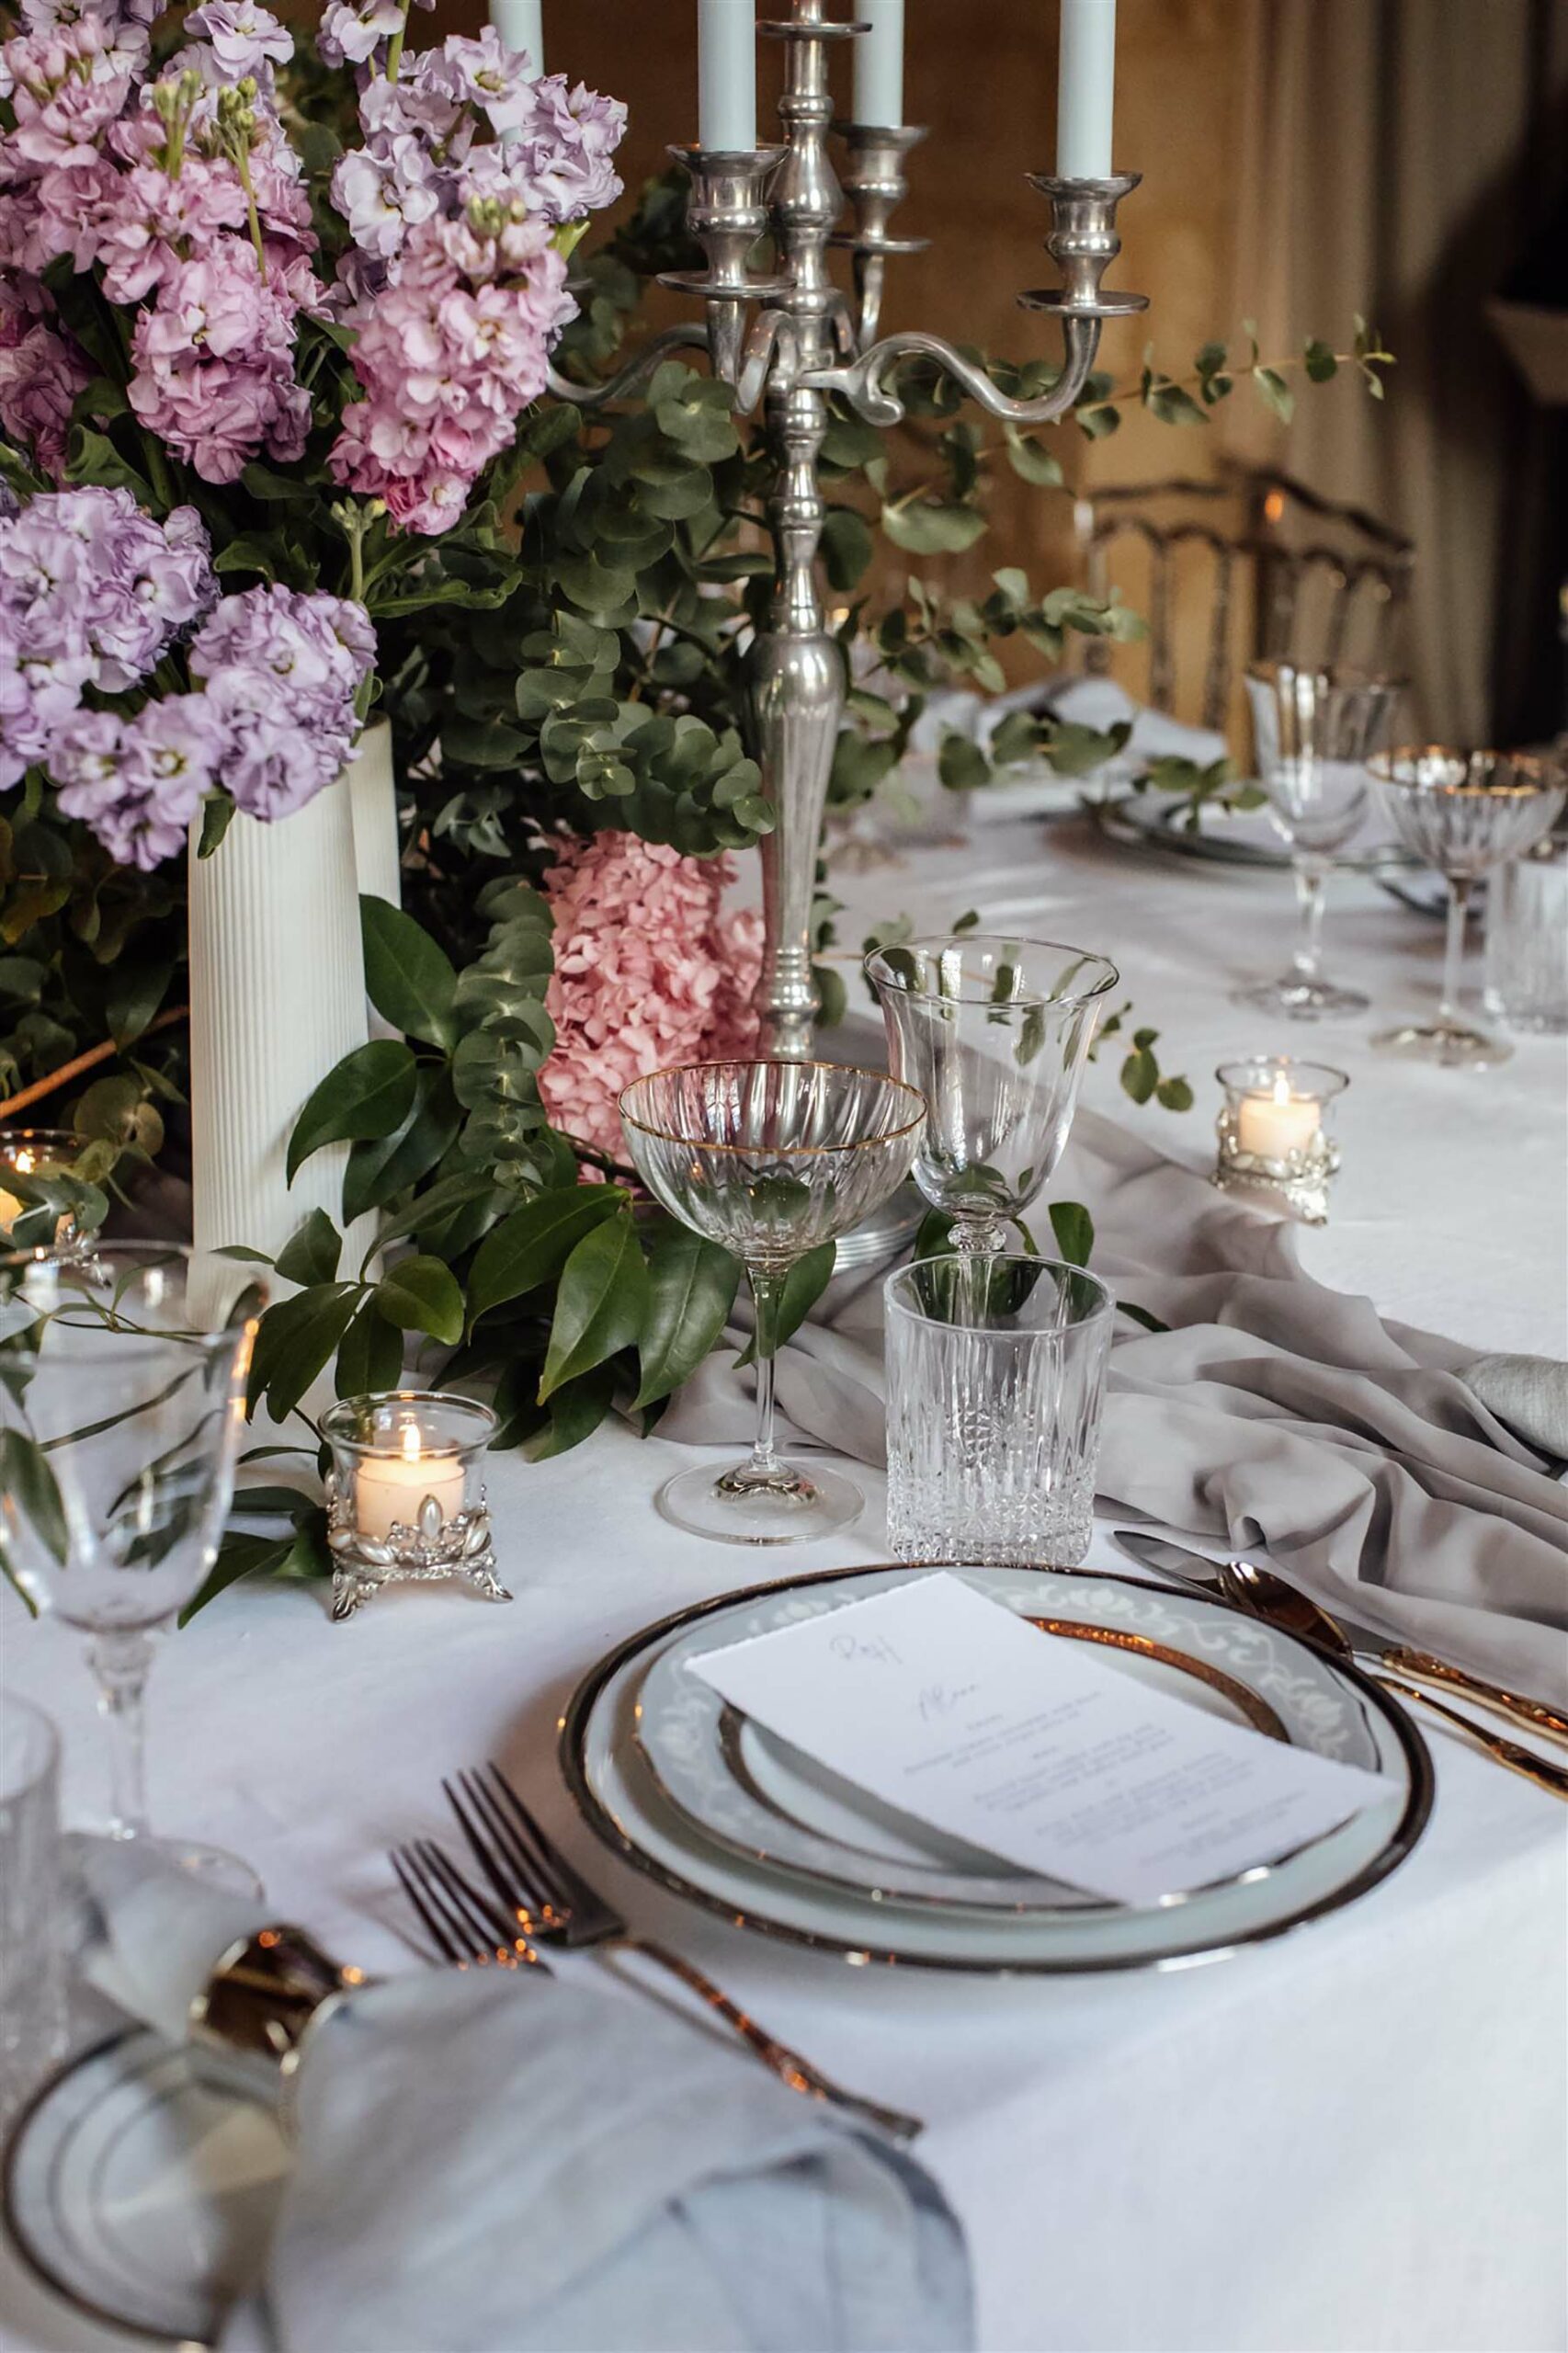 Beau Monde Modern Meets Old-World Styled Shoot - Tablescape